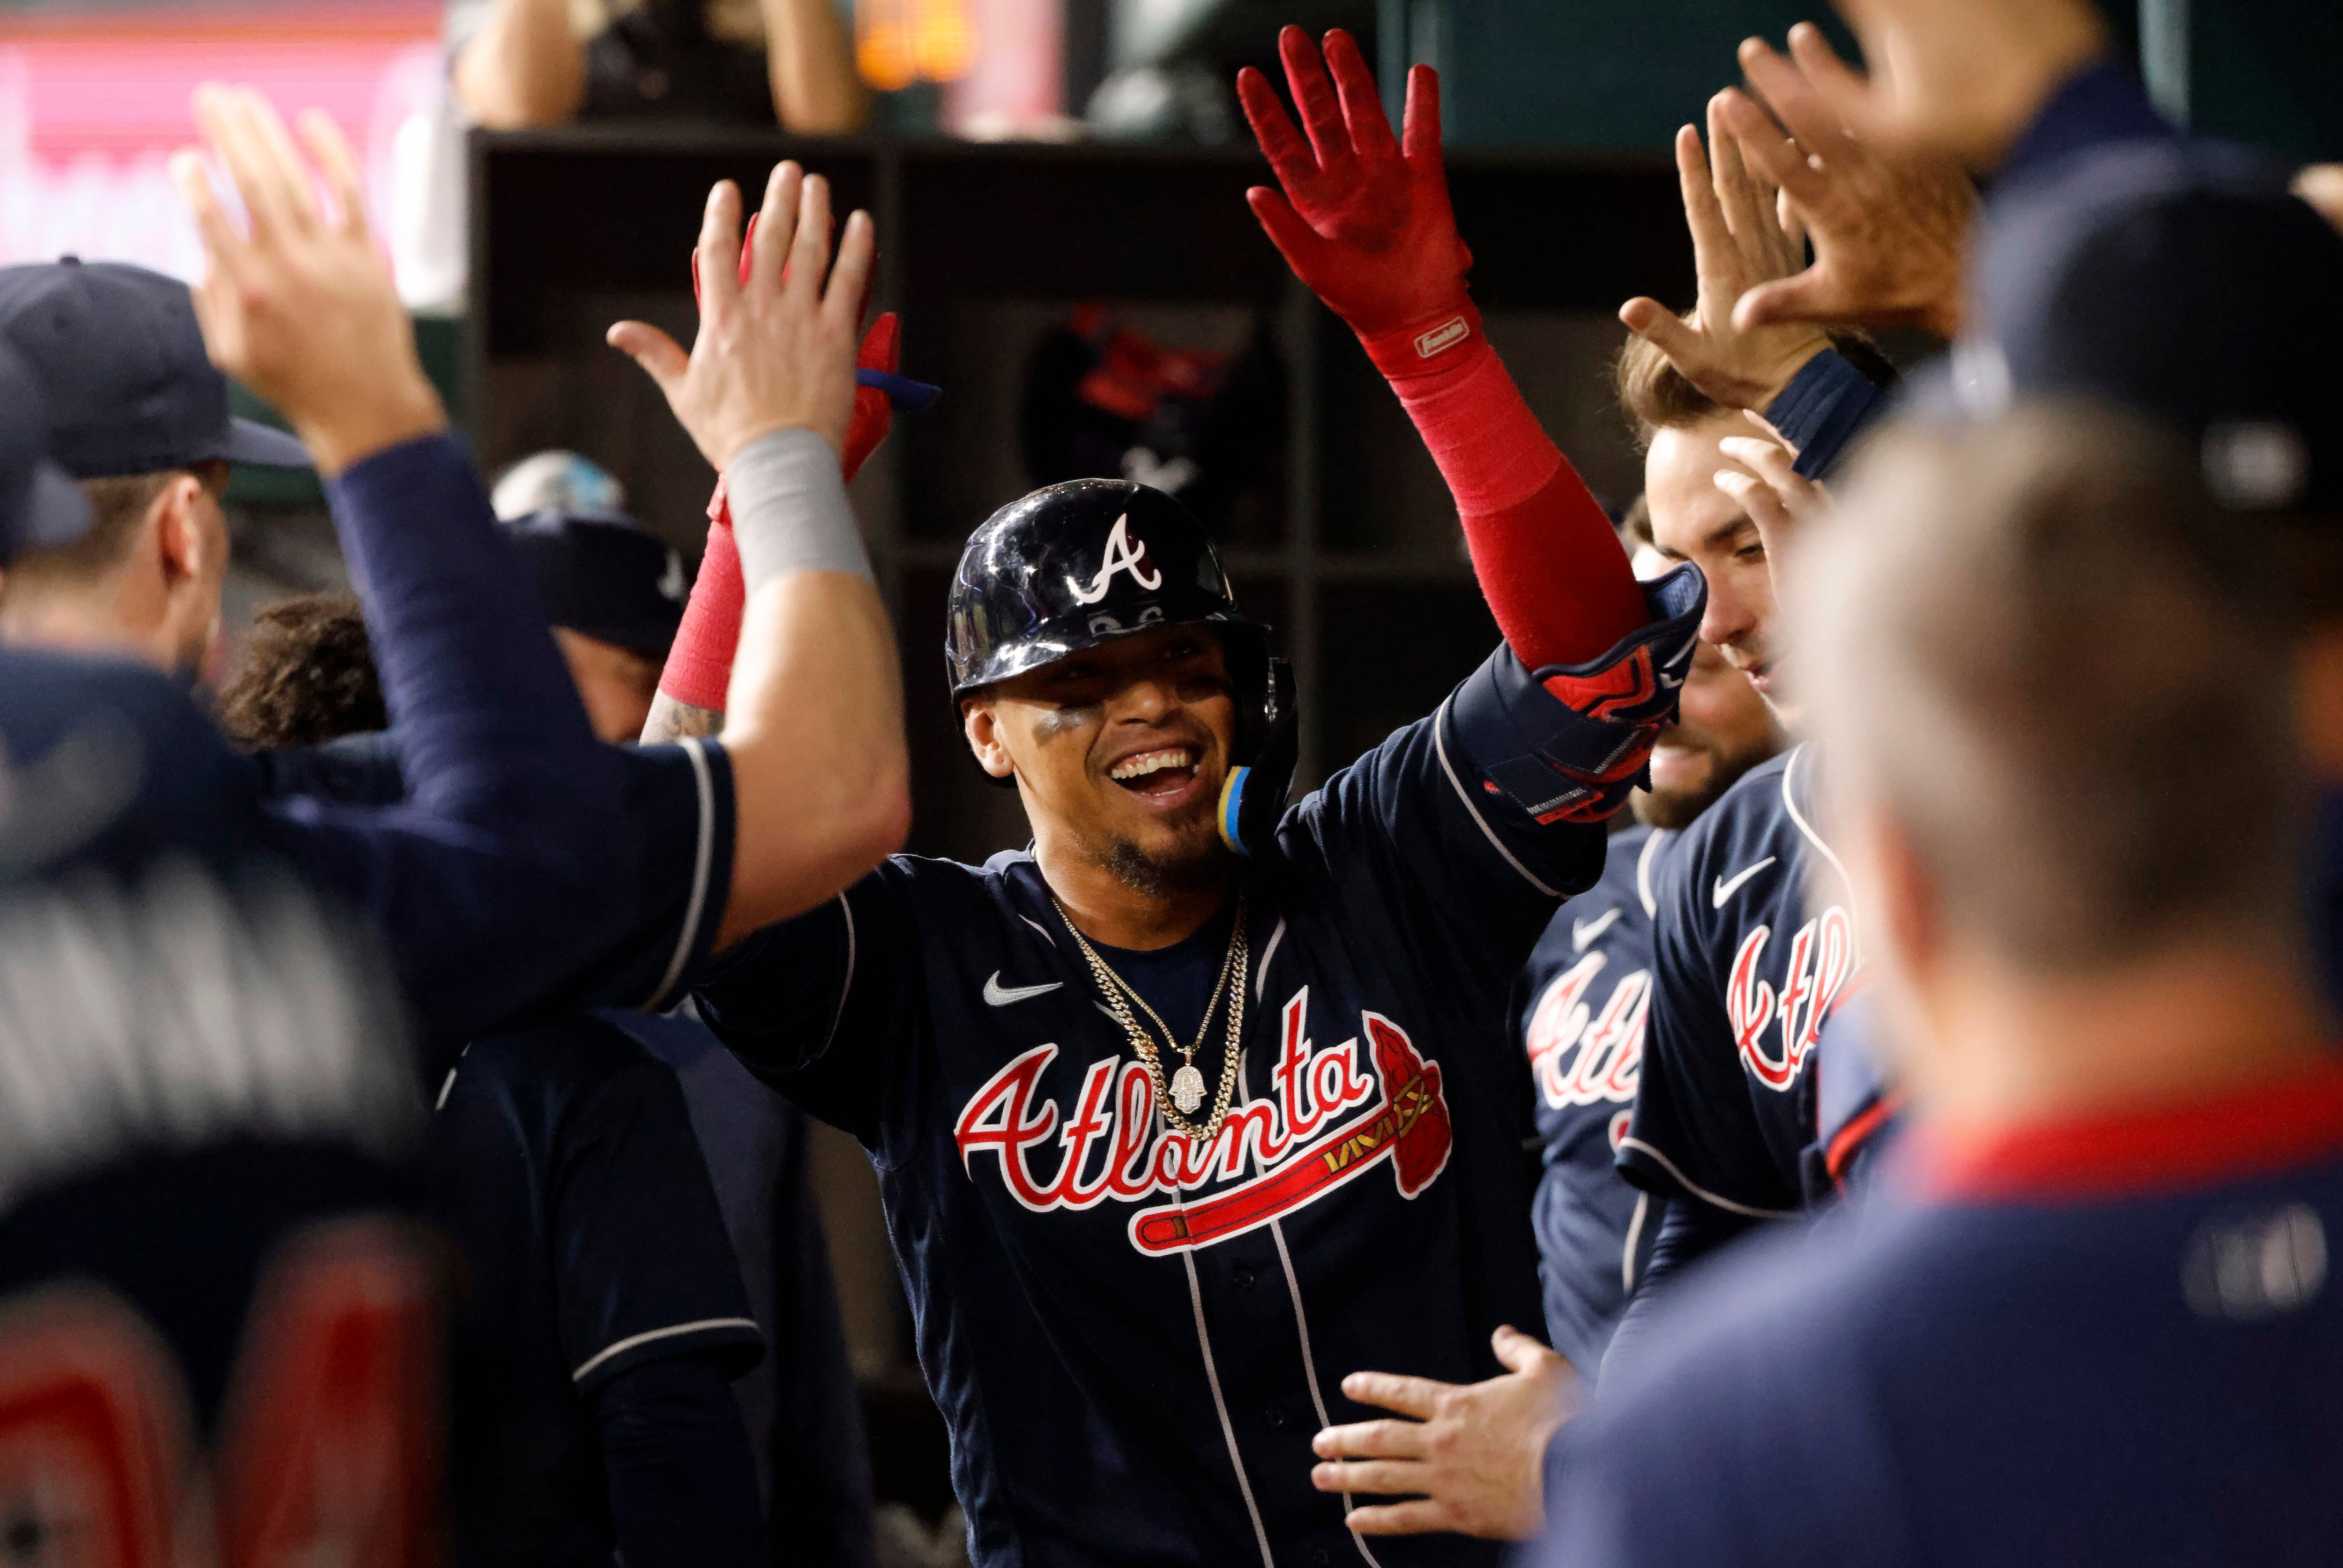 Braves add a jersey patch sponsorship, from Atlanta-based QUIKRETE - Sports  Illustrated Atlanta Braves News, Analysis and More